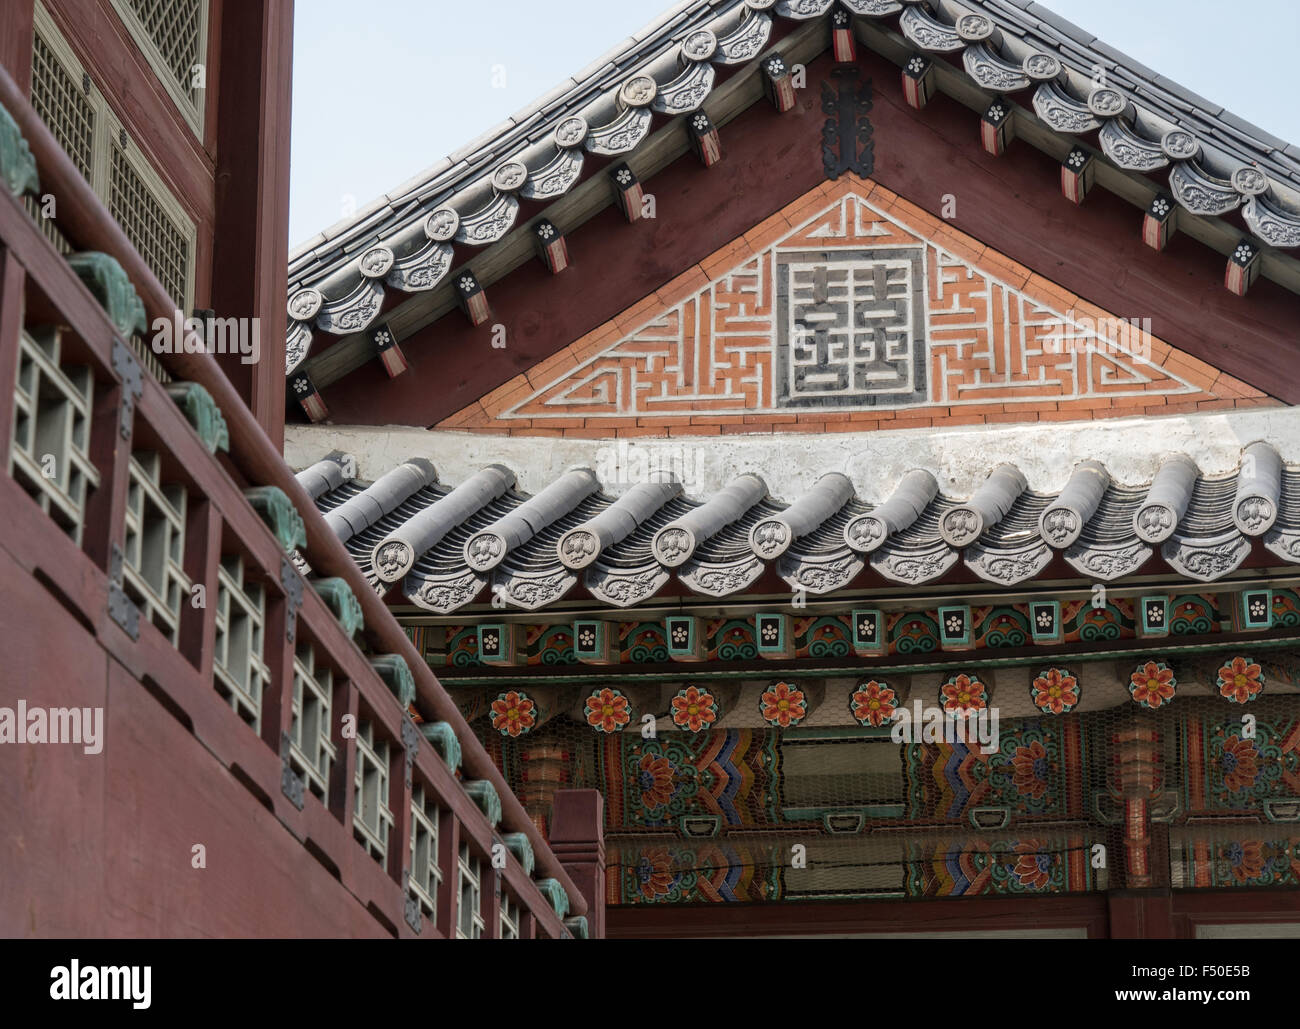 Ornate roof shingles and a double happiness emblem at the Gyeongbokgung Palace (경복궁) in Seoul, South Korea Stock Photo